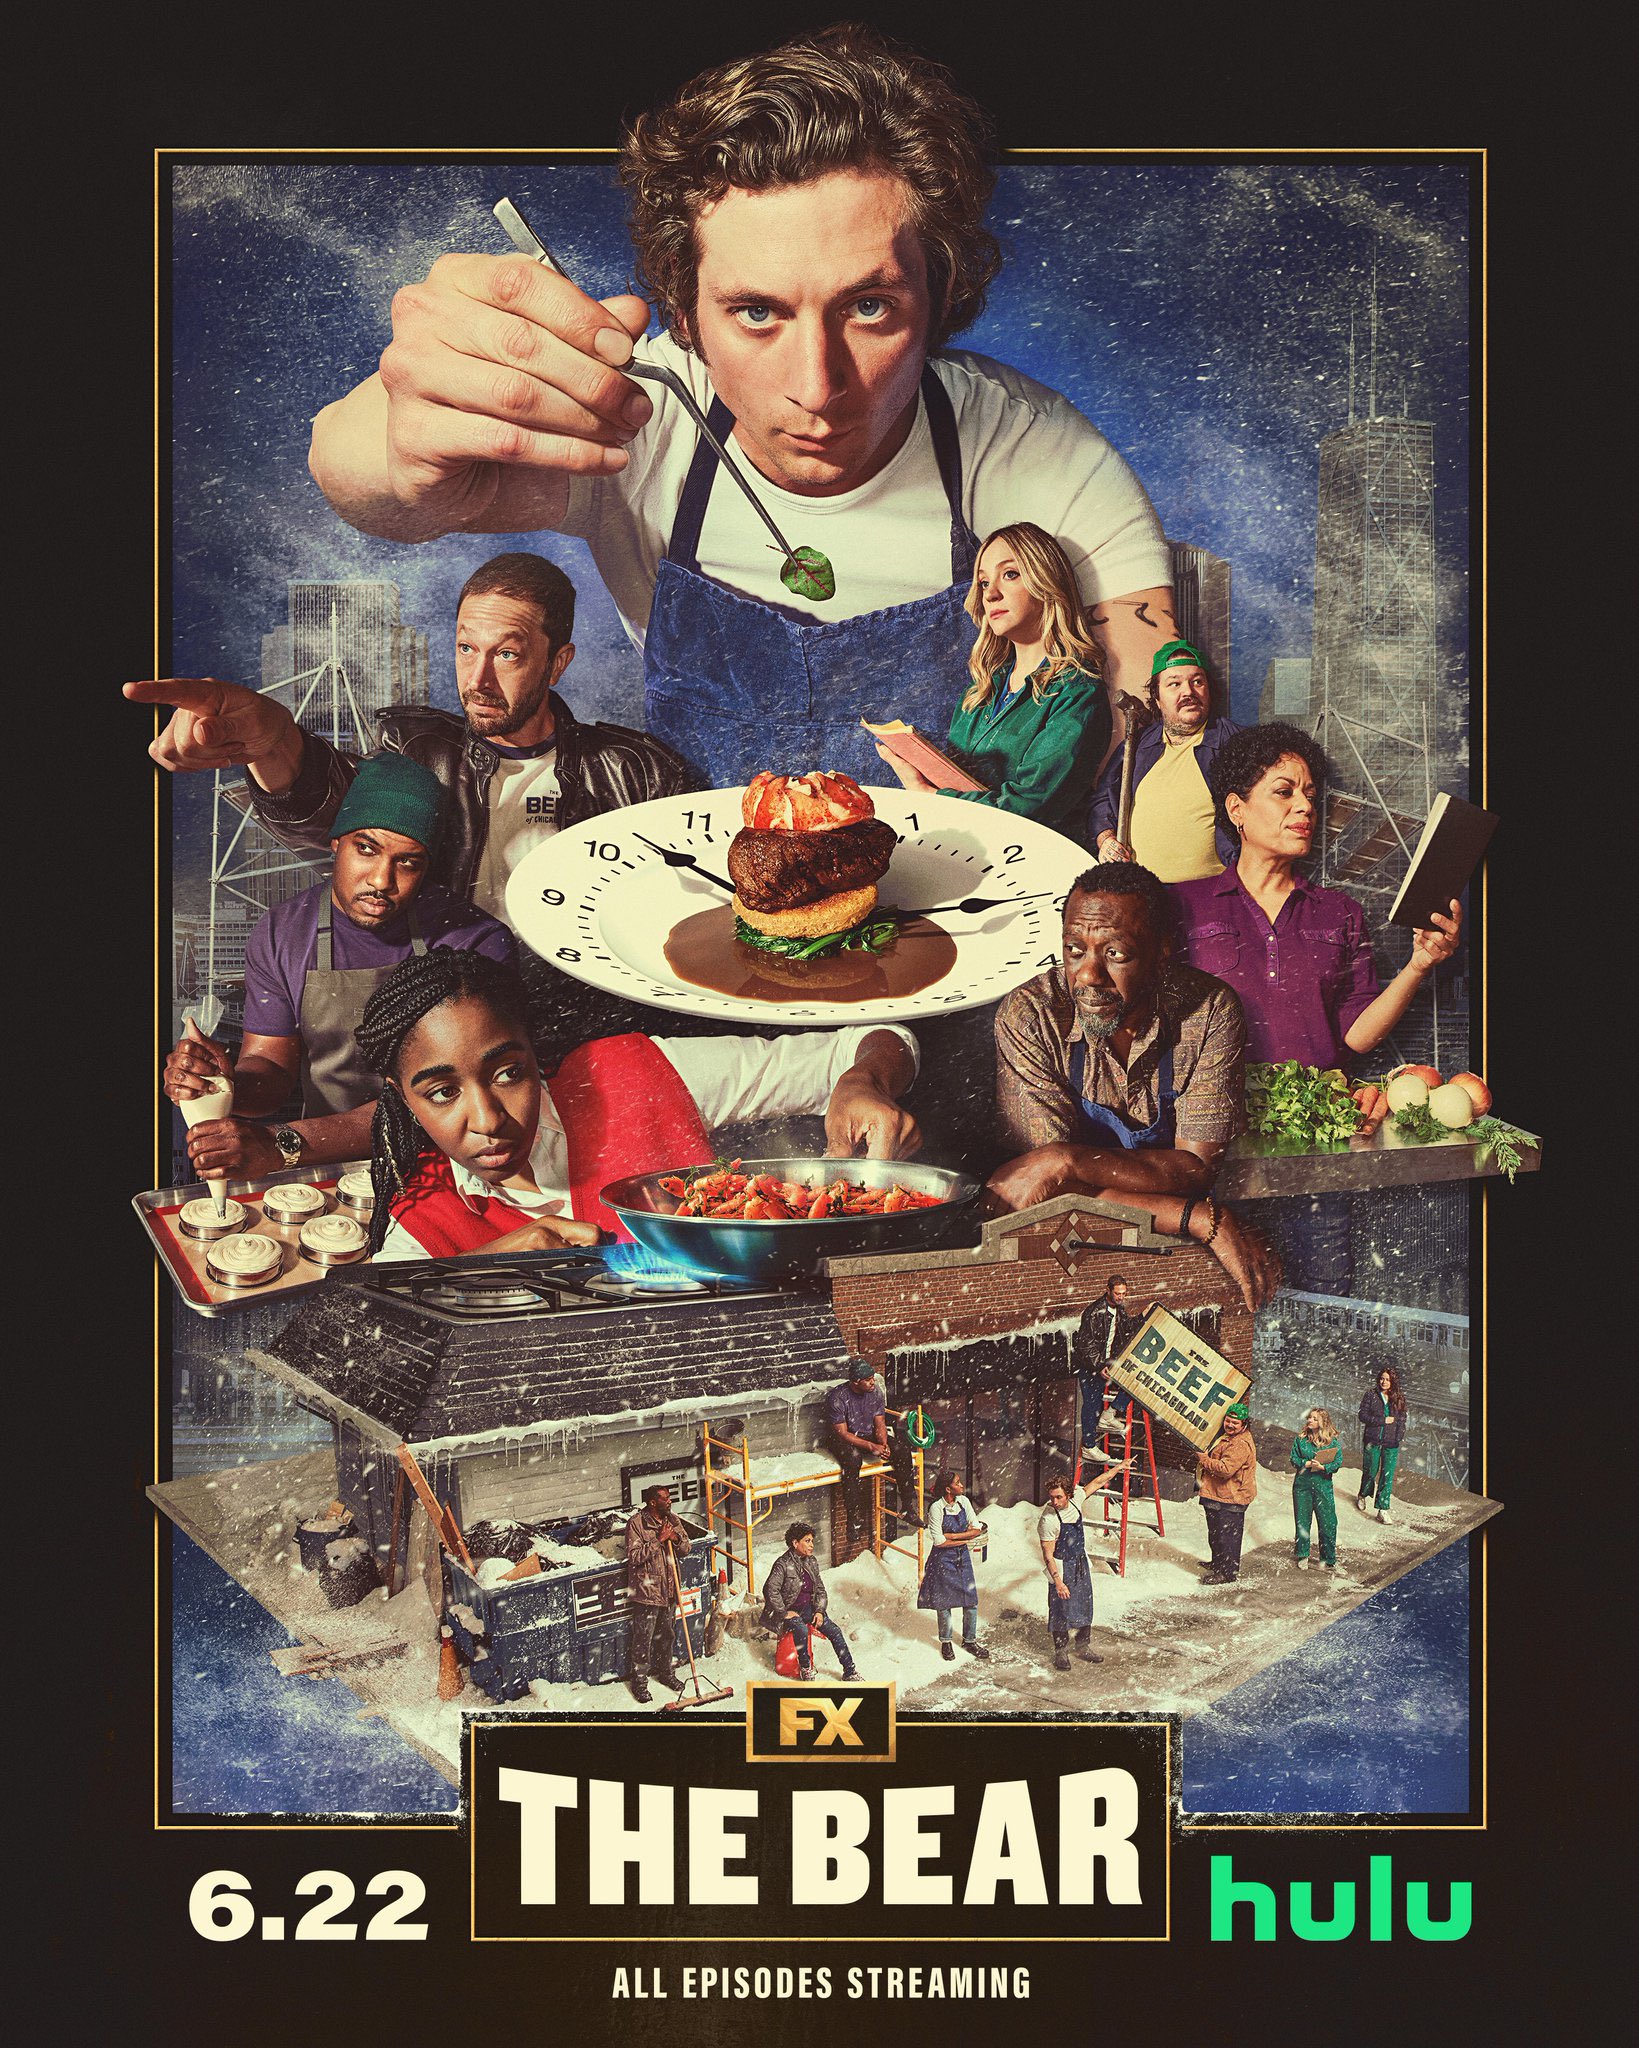 Poster for the TV show the Bear starring Jeremy Allen White playing Carmen "Carmy" Berzatto.